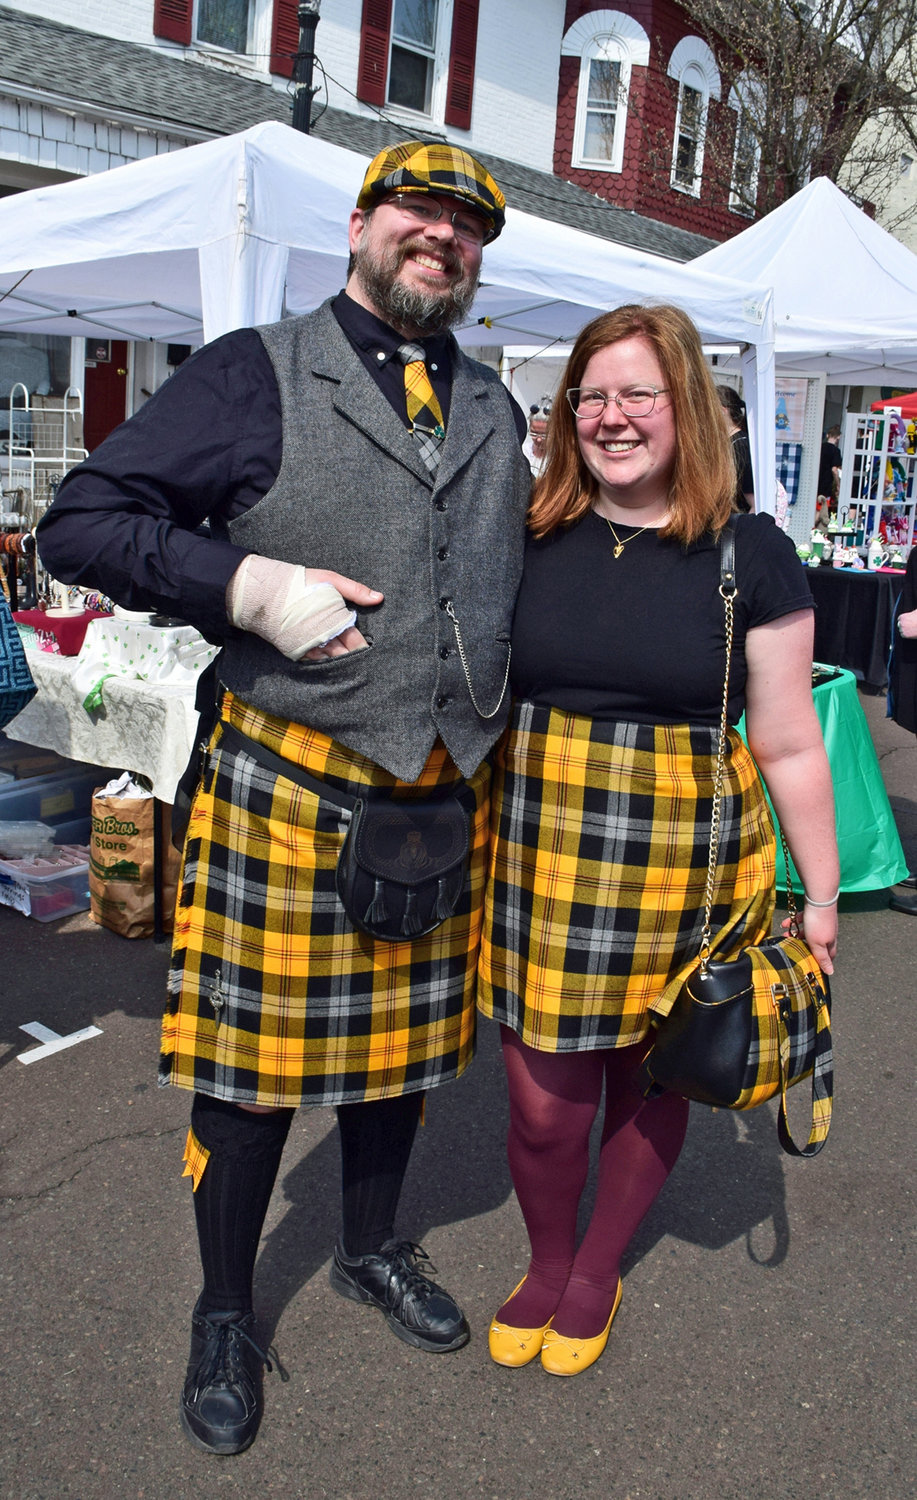 Robert Nunn, a participant in the kilt contest, and his wife, Samantha, of Sellersville. The couple handmade their attire.